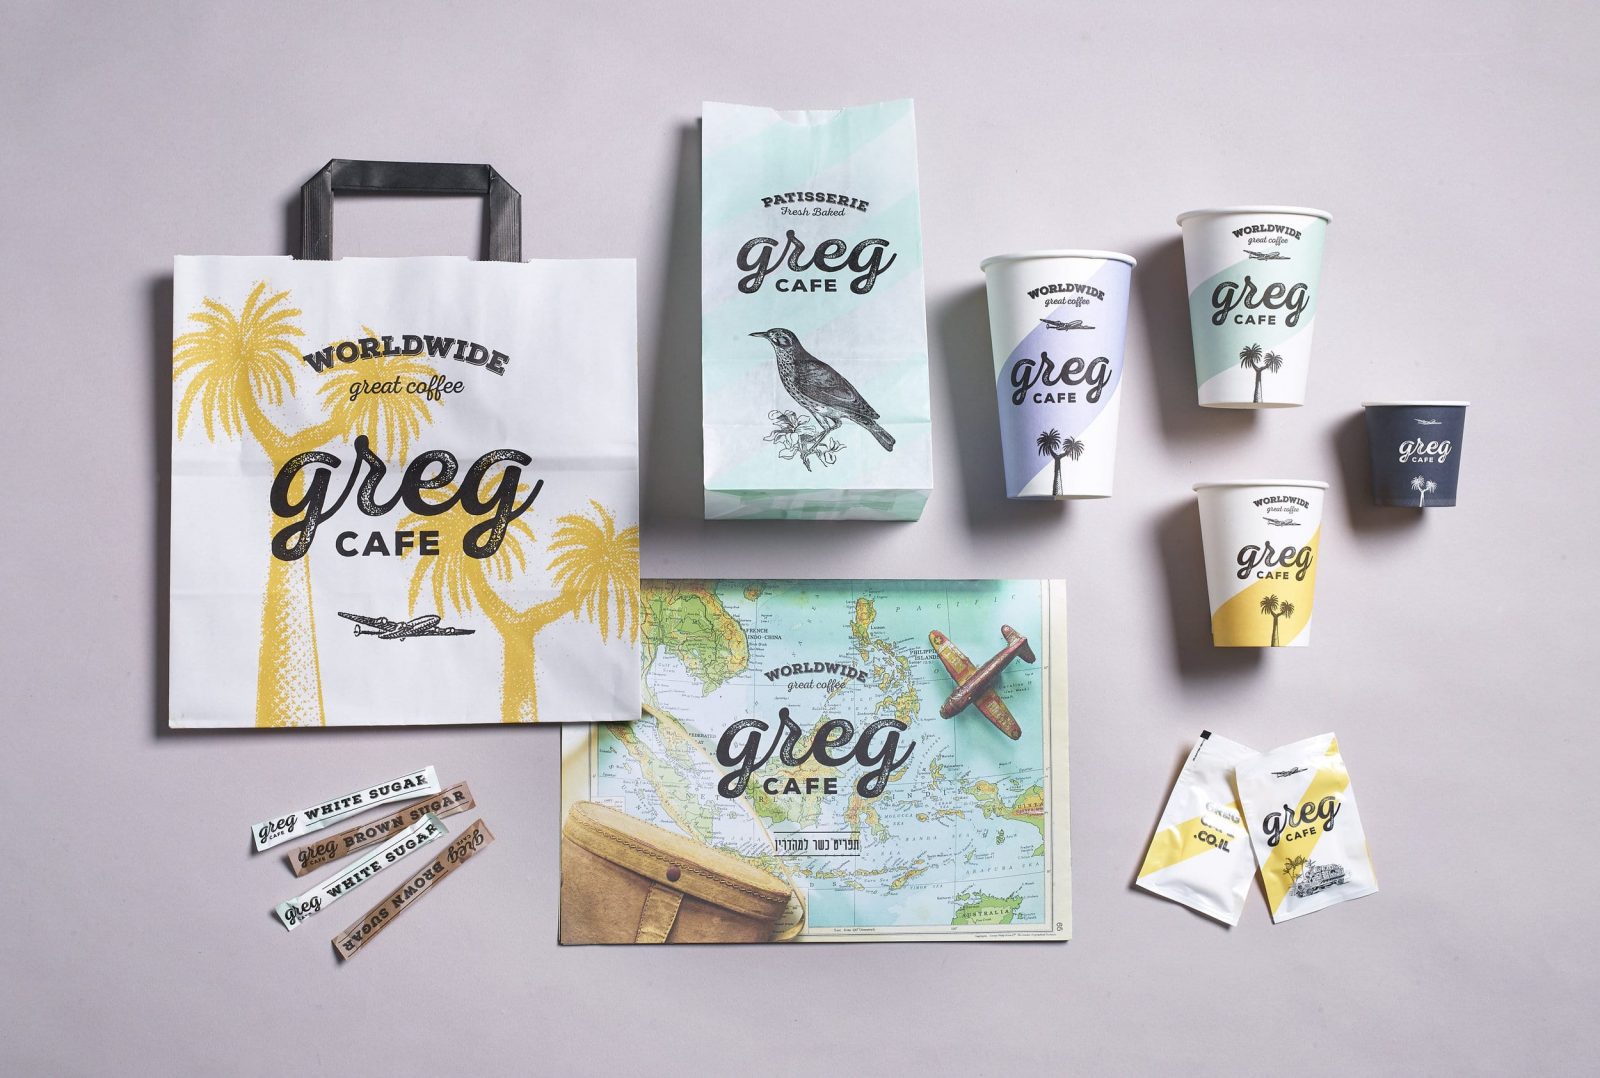 Branding for Greg Cafe, a Chain of Nationwide Coffee Shops